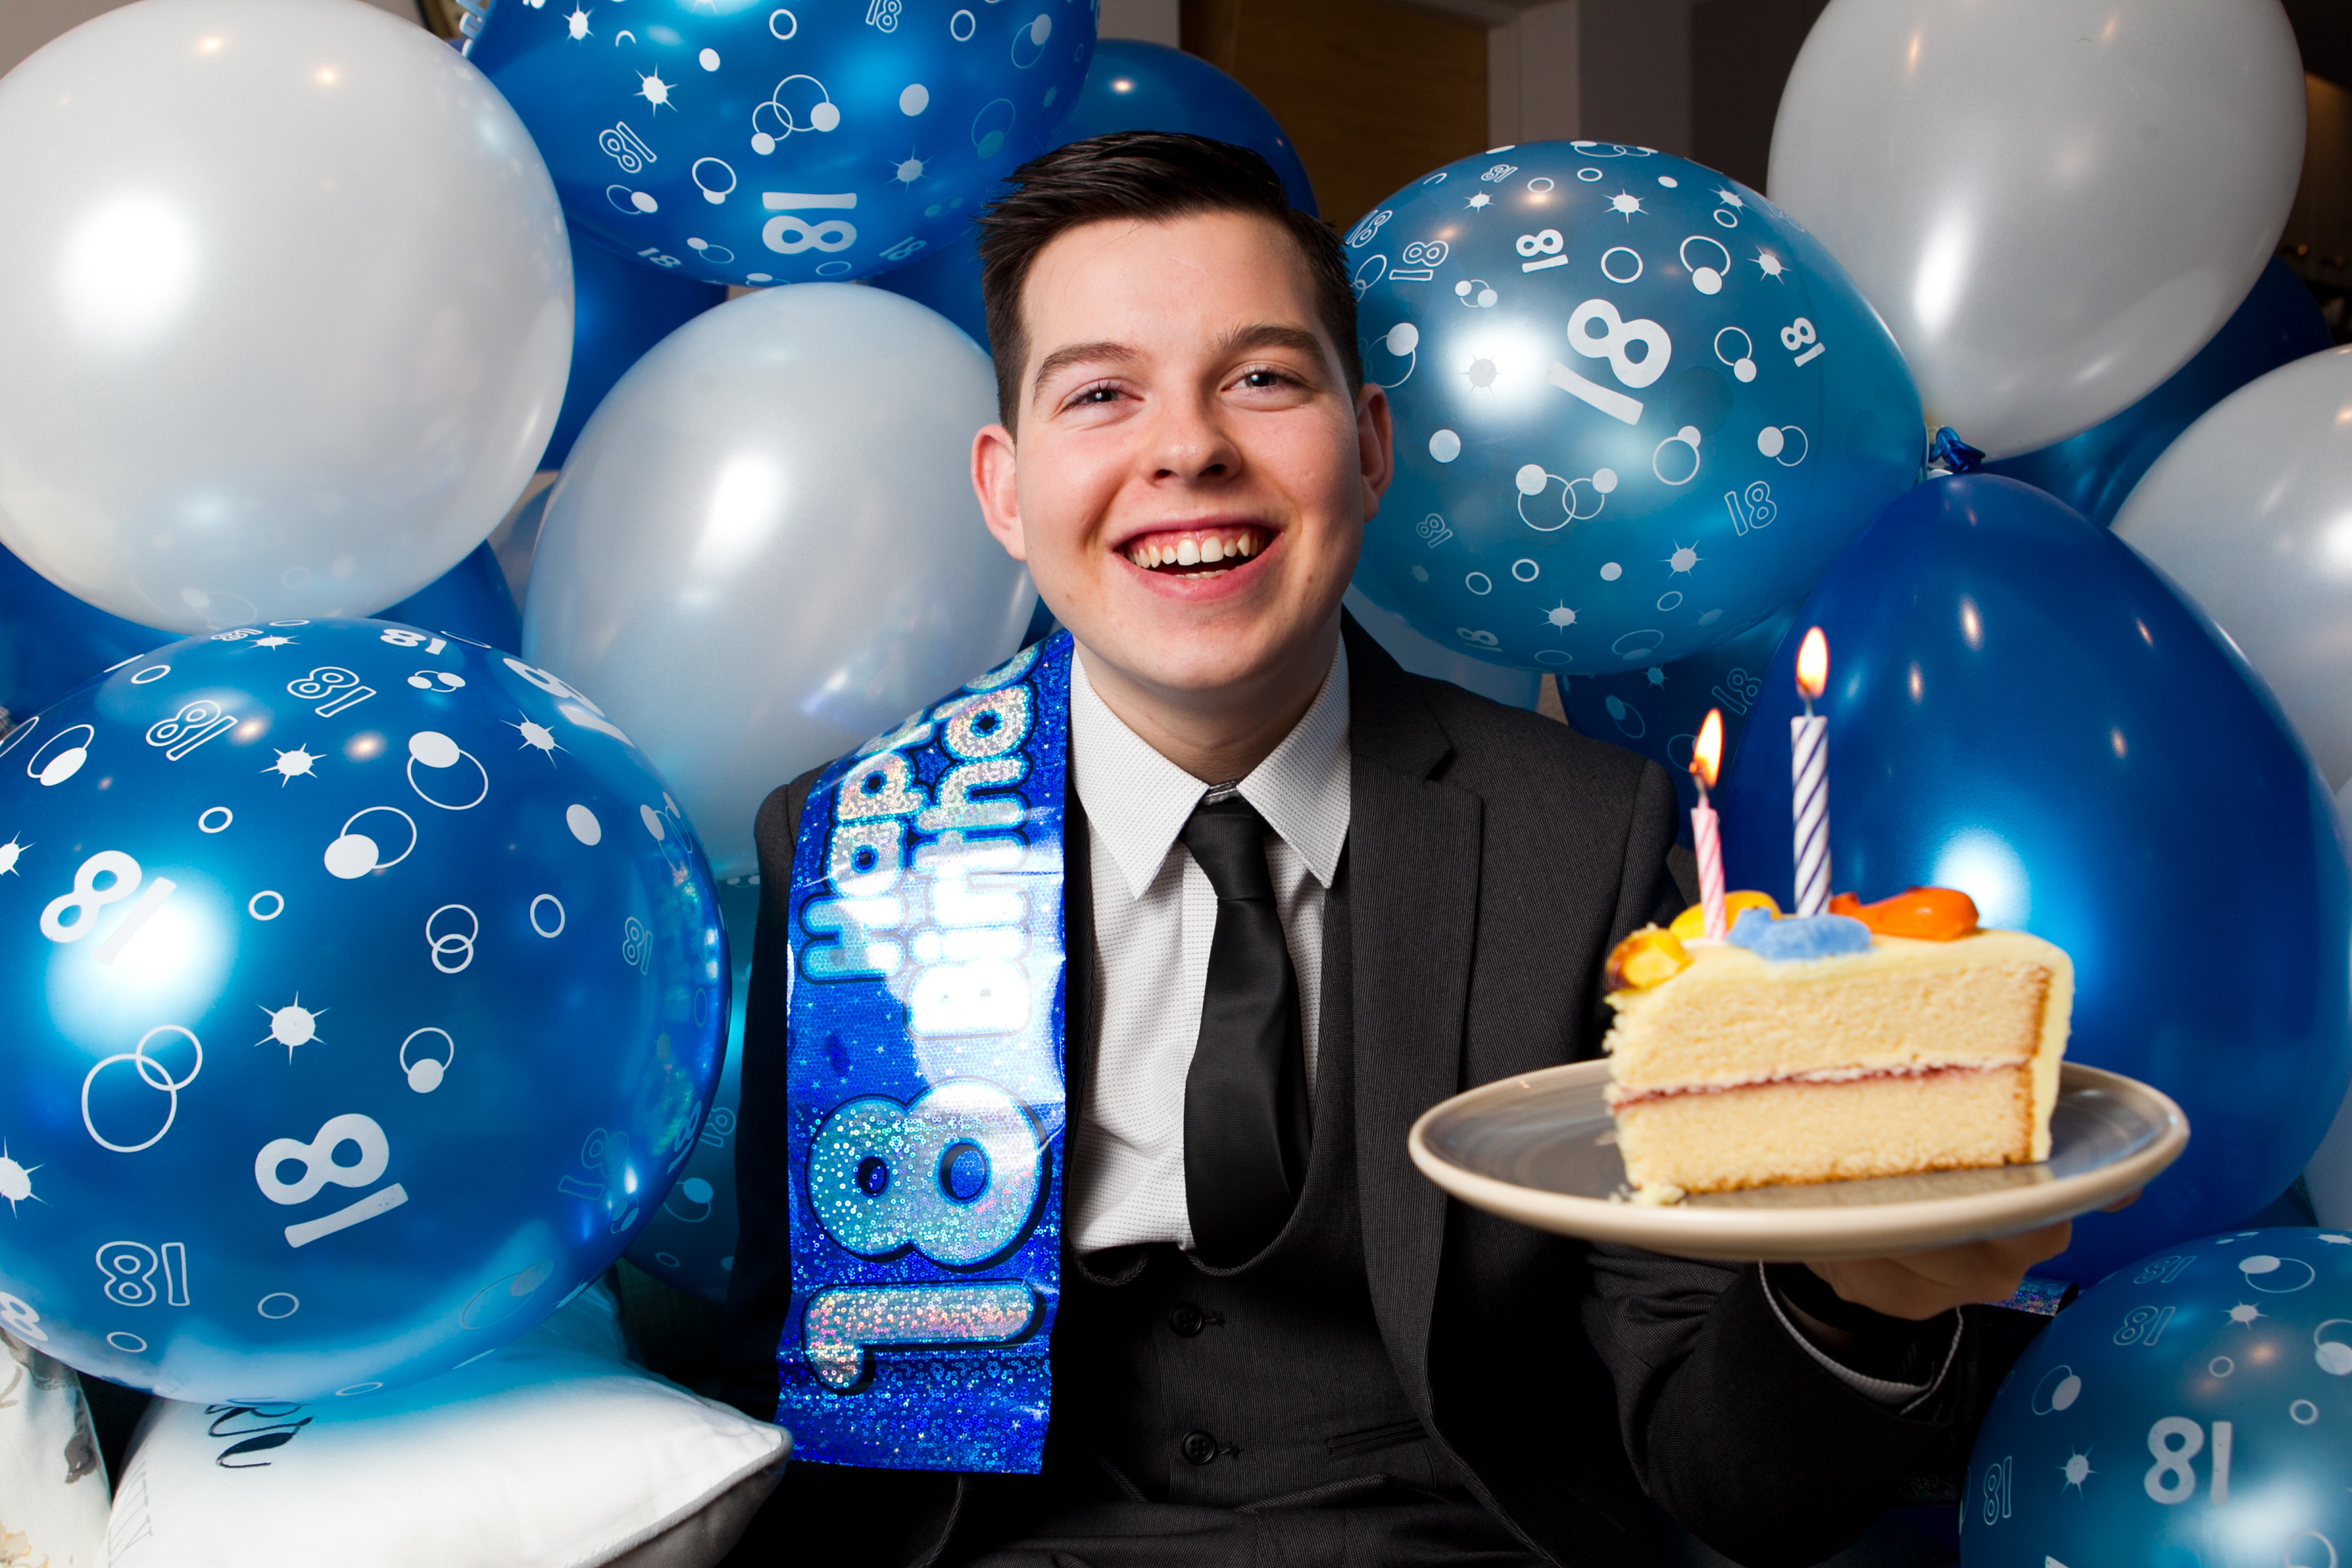 Callum Marshall, who has just turned 18 years old (Andrew Cawley / DC Thomson)